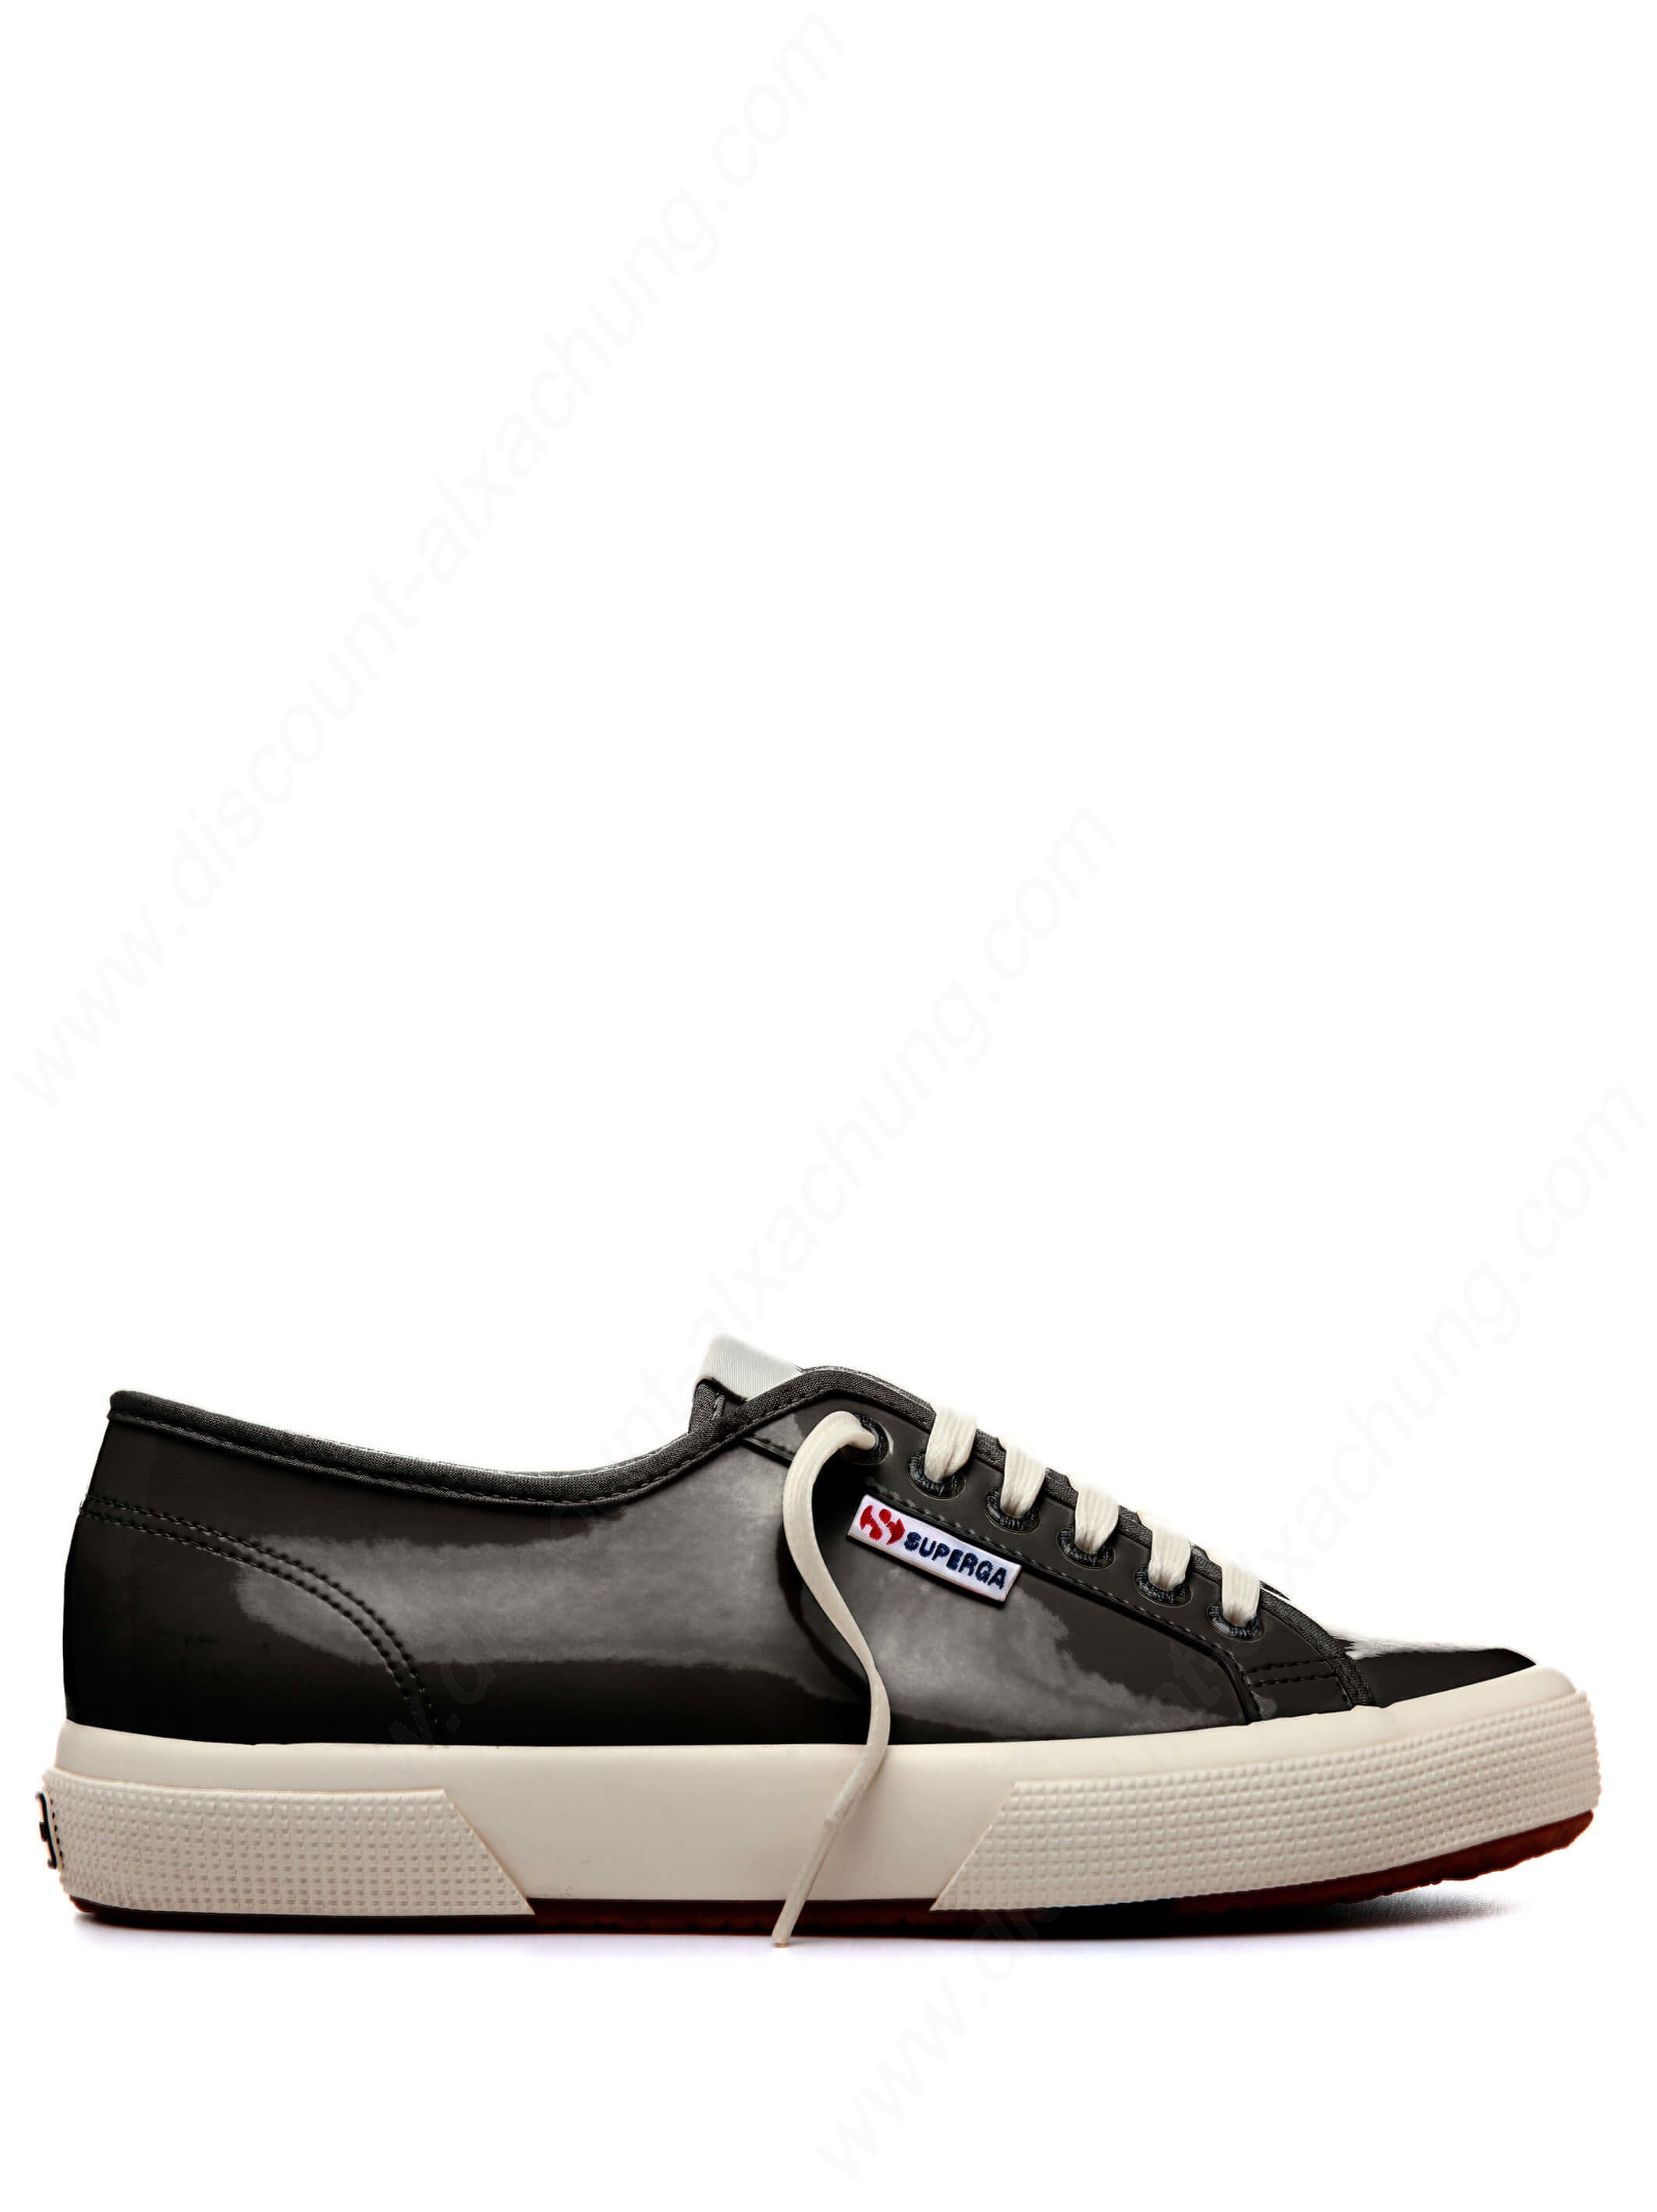 Alexachung Black Patent Is A Virtue Low Top - Alexachung Black Patent Is A Virtue Low Top